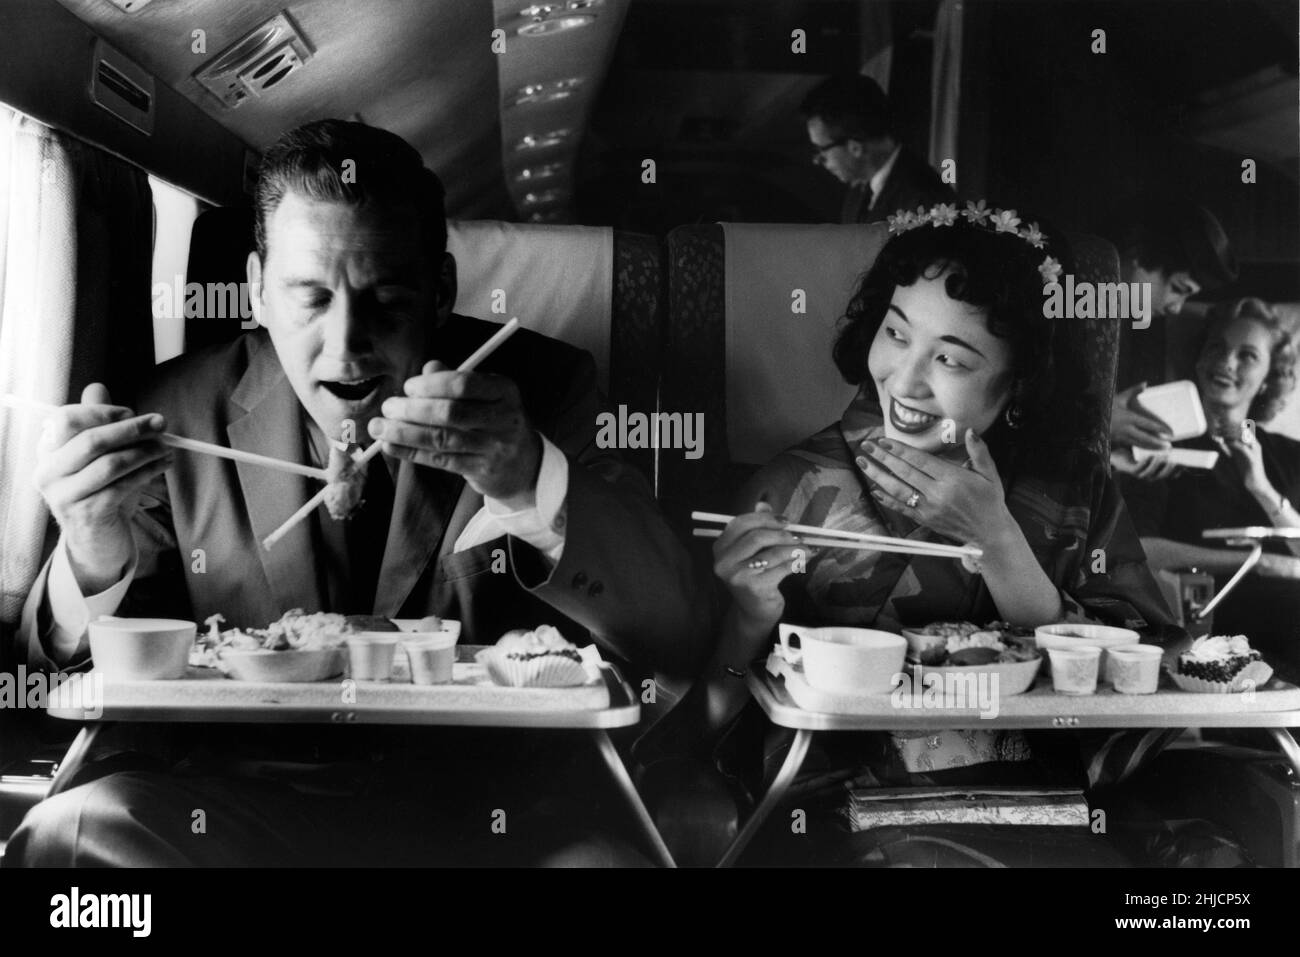 A passenger on Northwest Orient Airlines gets a lesson in using chopsticks. Circa 1960. Stock Photo